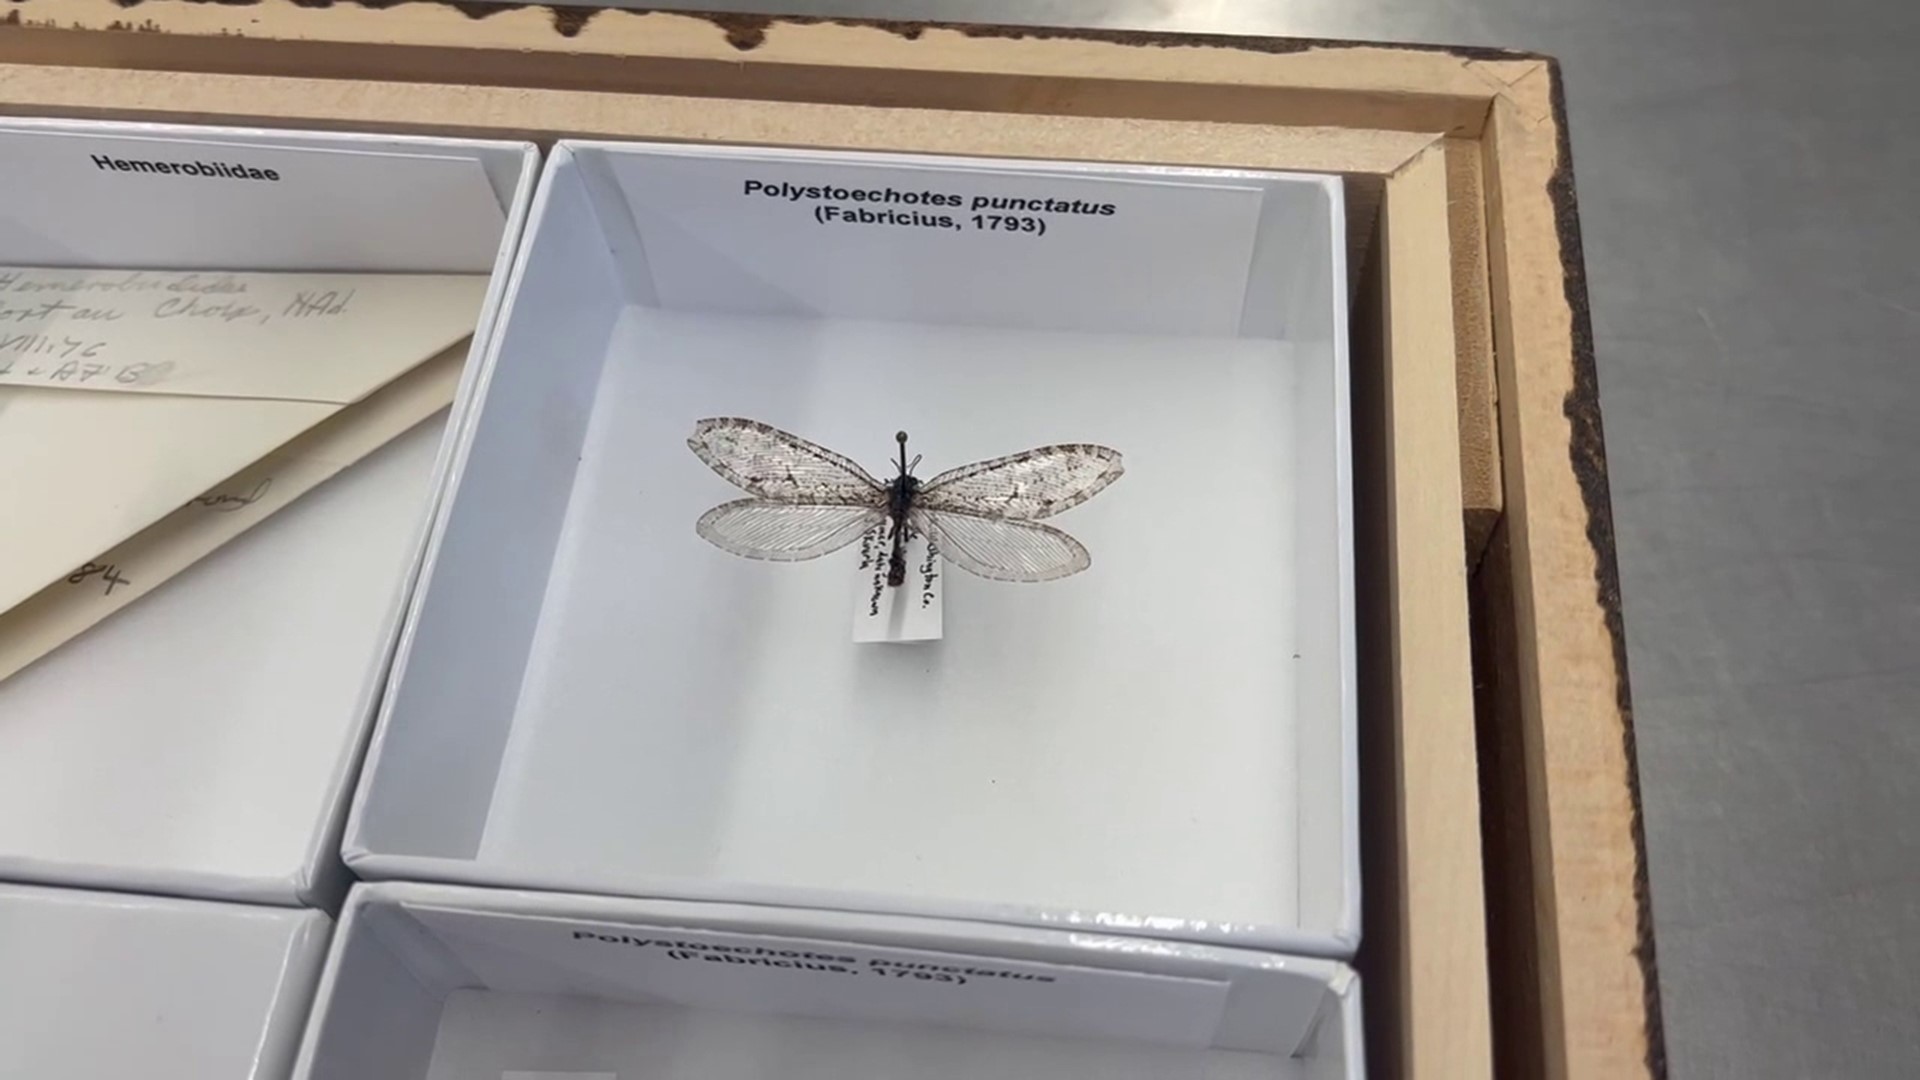 The Giant Lacewing was found in 2012 in Arkansas and rediscovered a decade later at Penn State University.